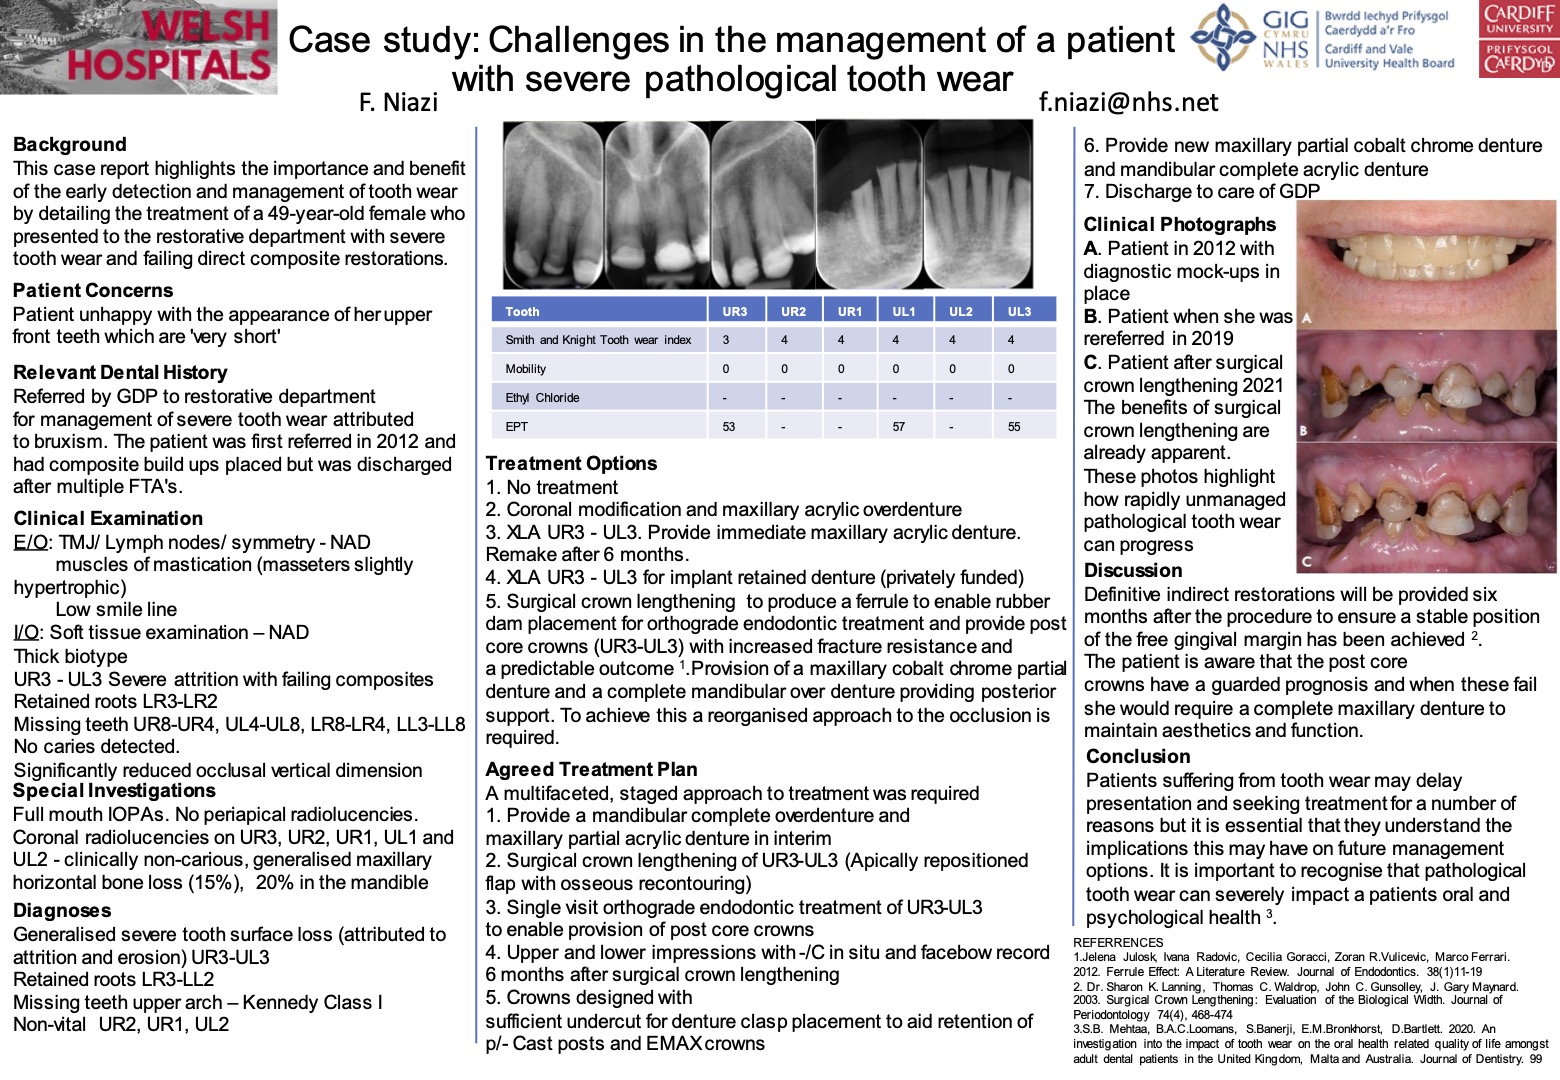 Poster Case study: Challenges in the management of a patient with severe pathological tooth wear